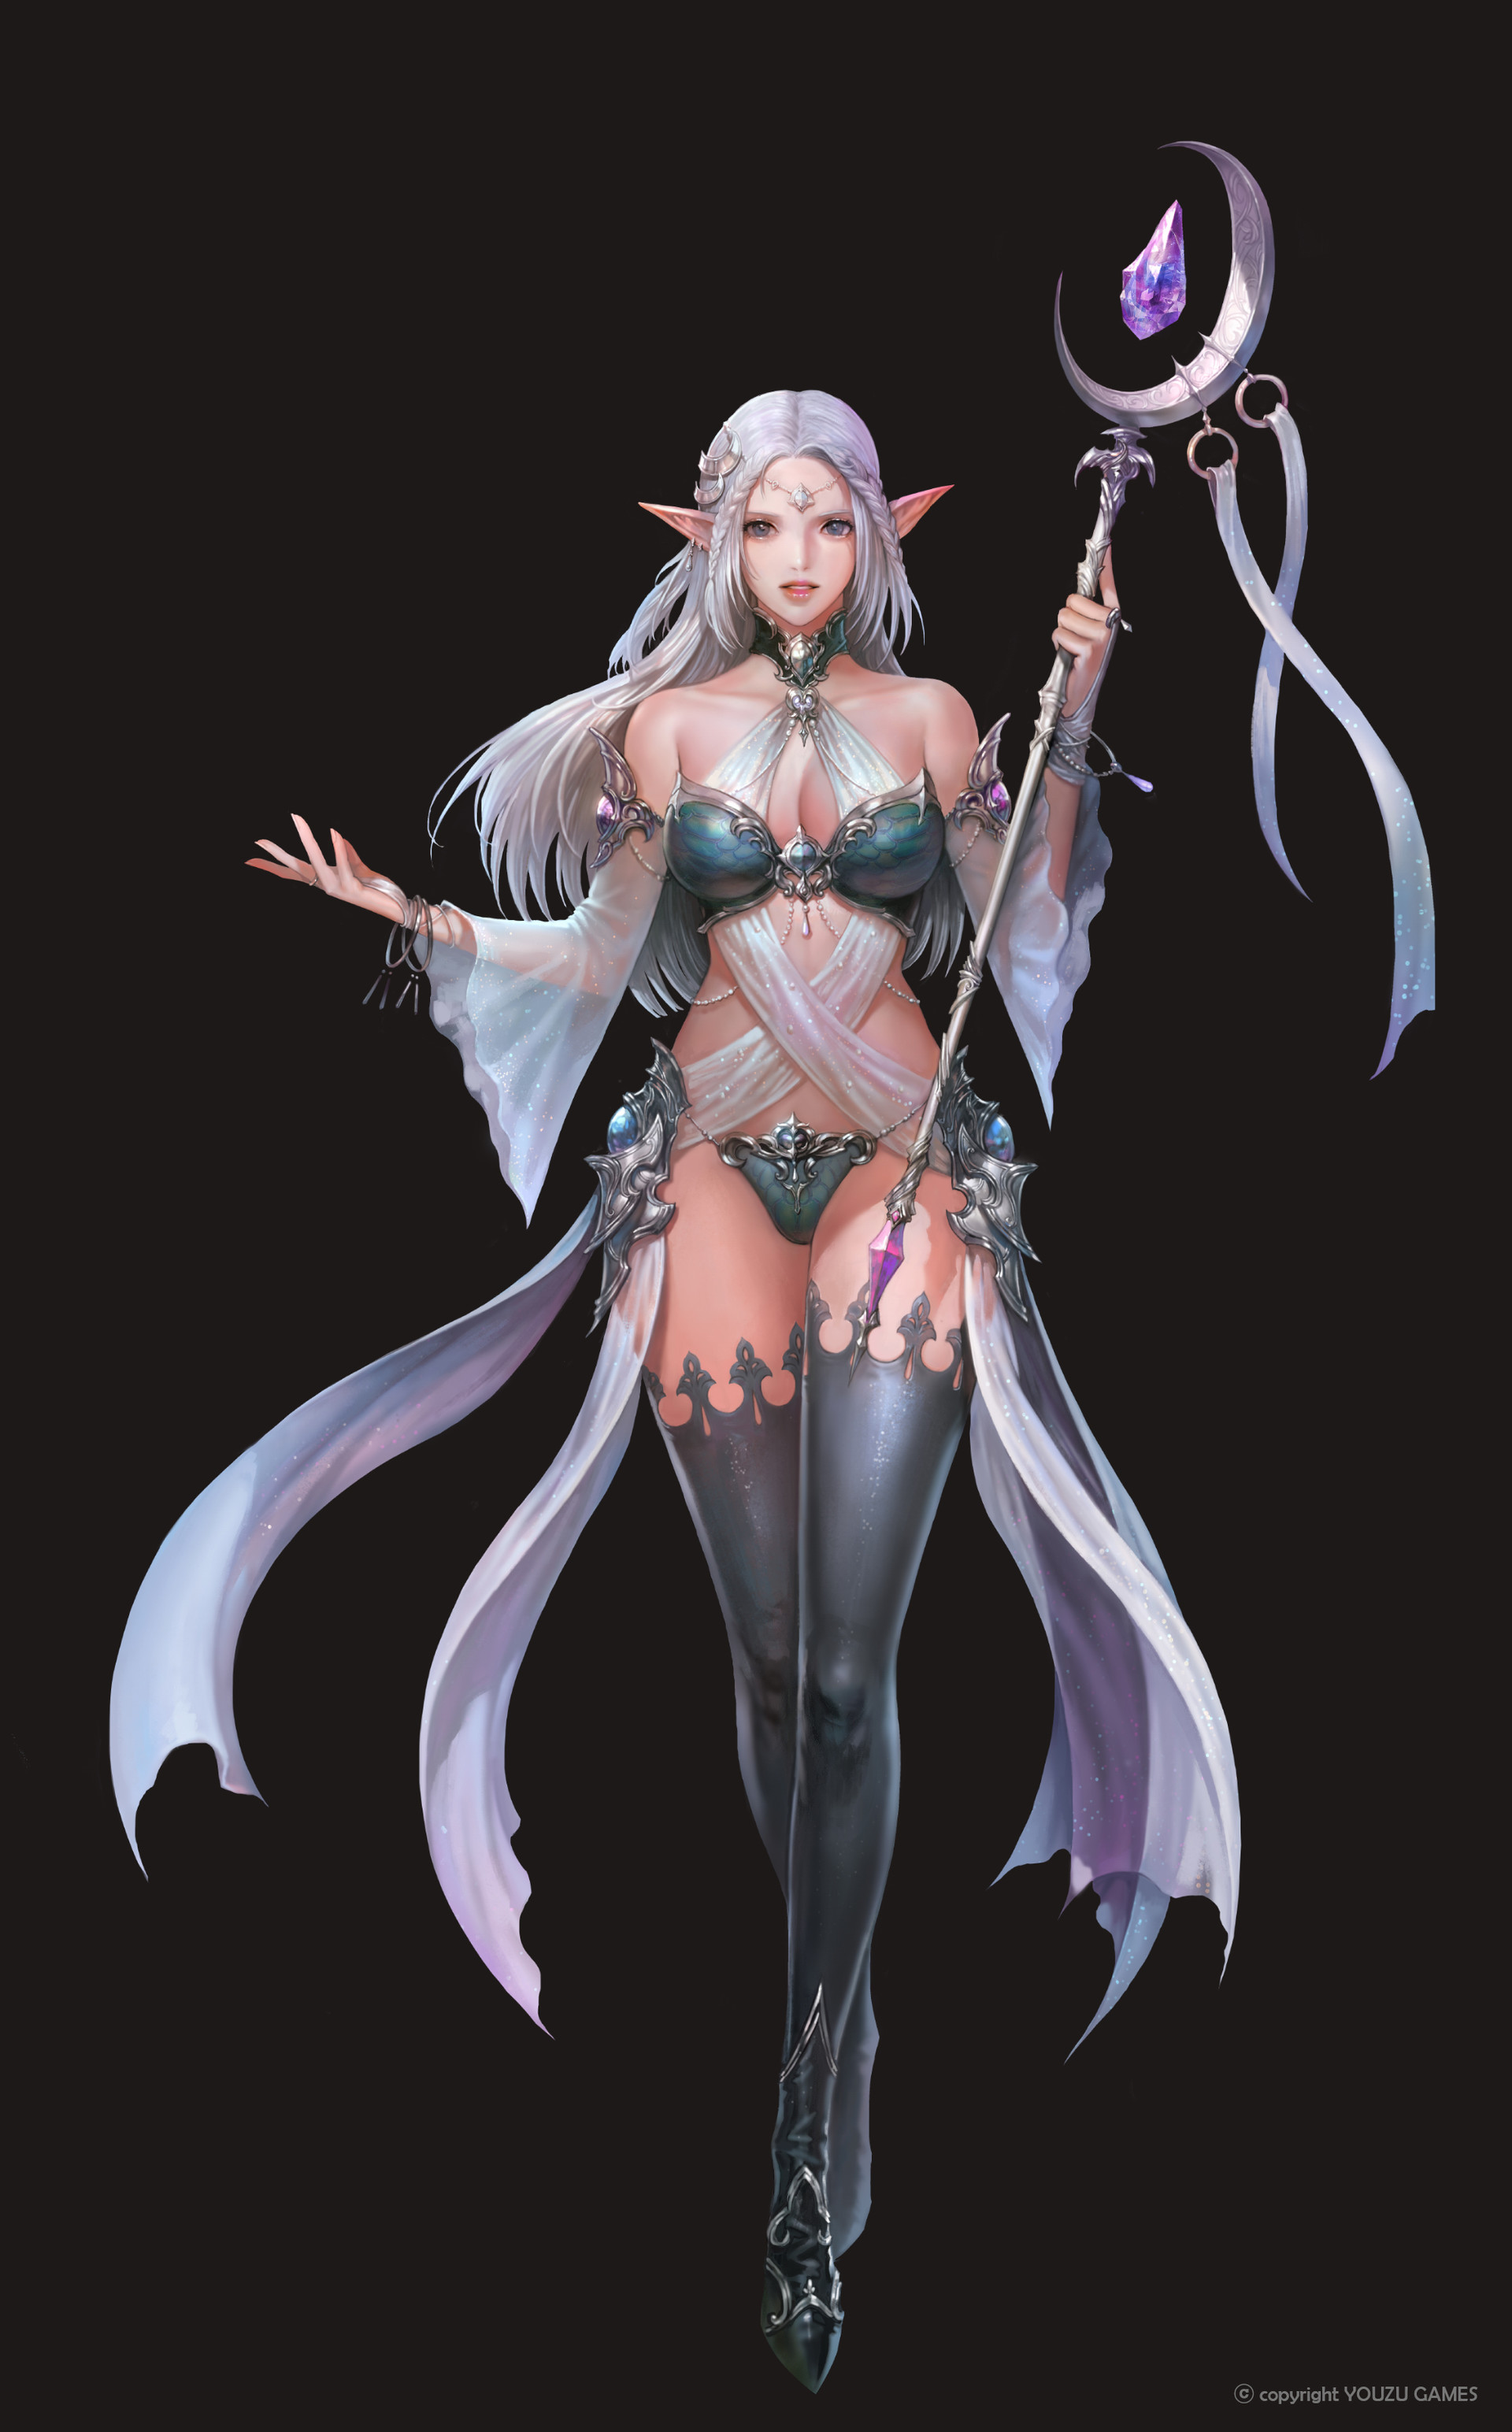 General 1920x3088 Nessi drawing women silver hair long hair straight hair wind hair accessories elves pointy ears dress bra cloth panties thigh-highs legs crossed looking at viewer weapon magician staff gems amethyst simple background tiaras